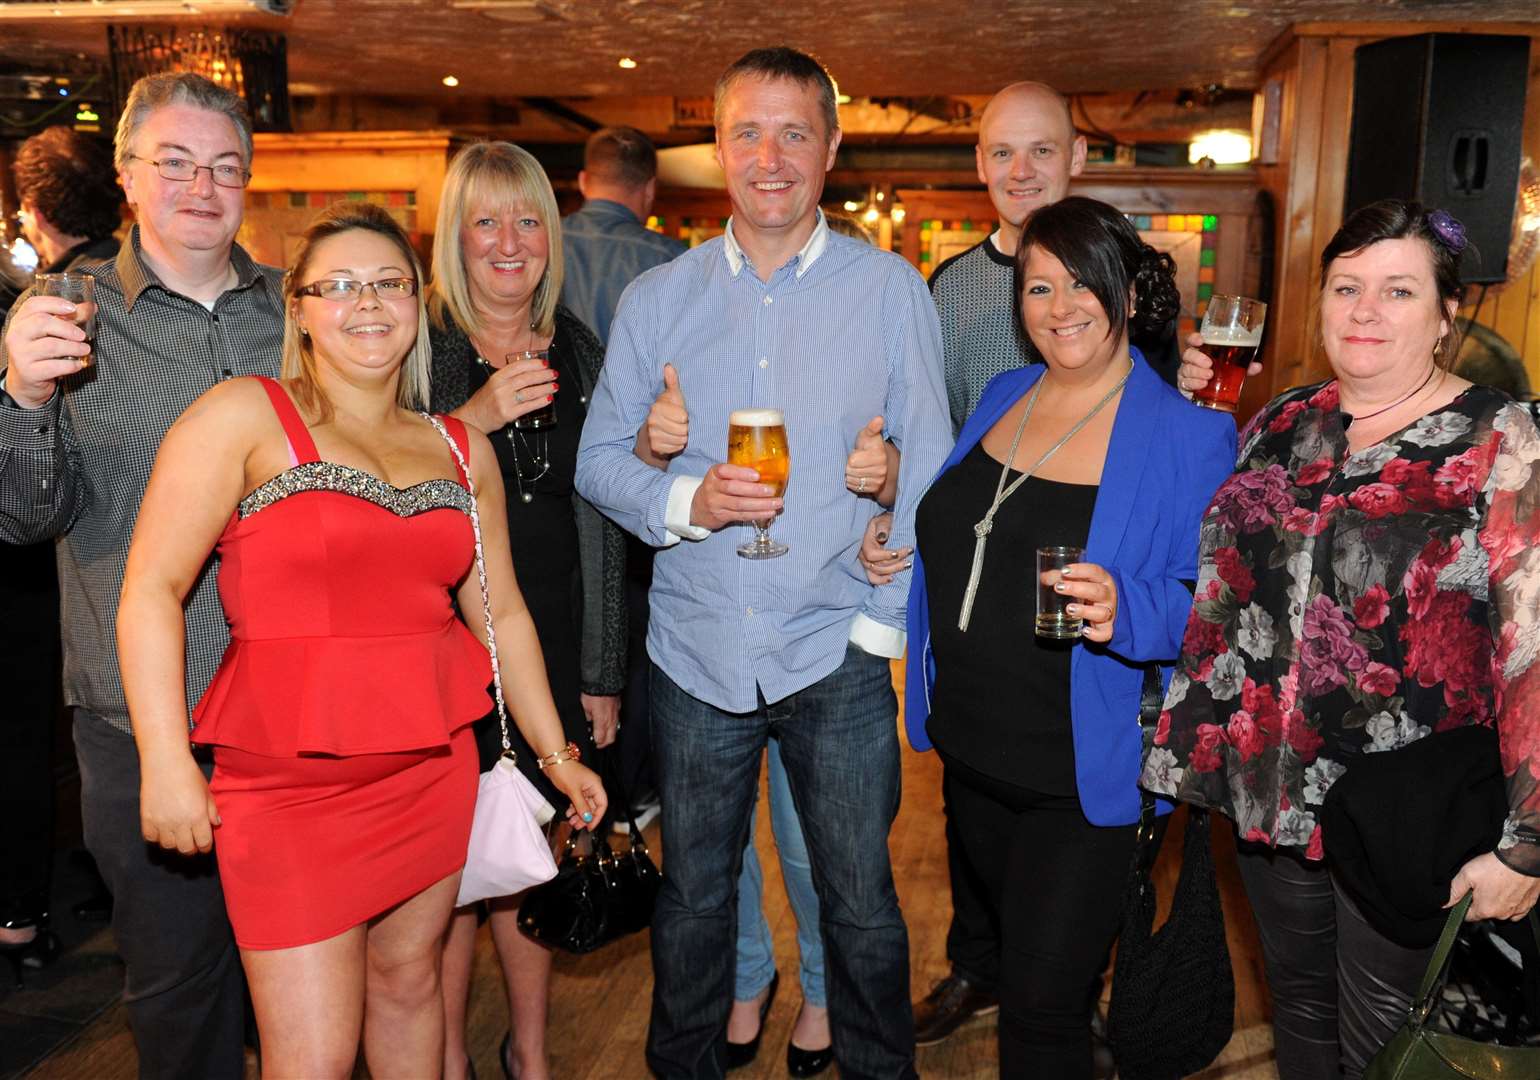 Members of Inverness Leisure Jog Scotland team enjoy an evening at Foxes .